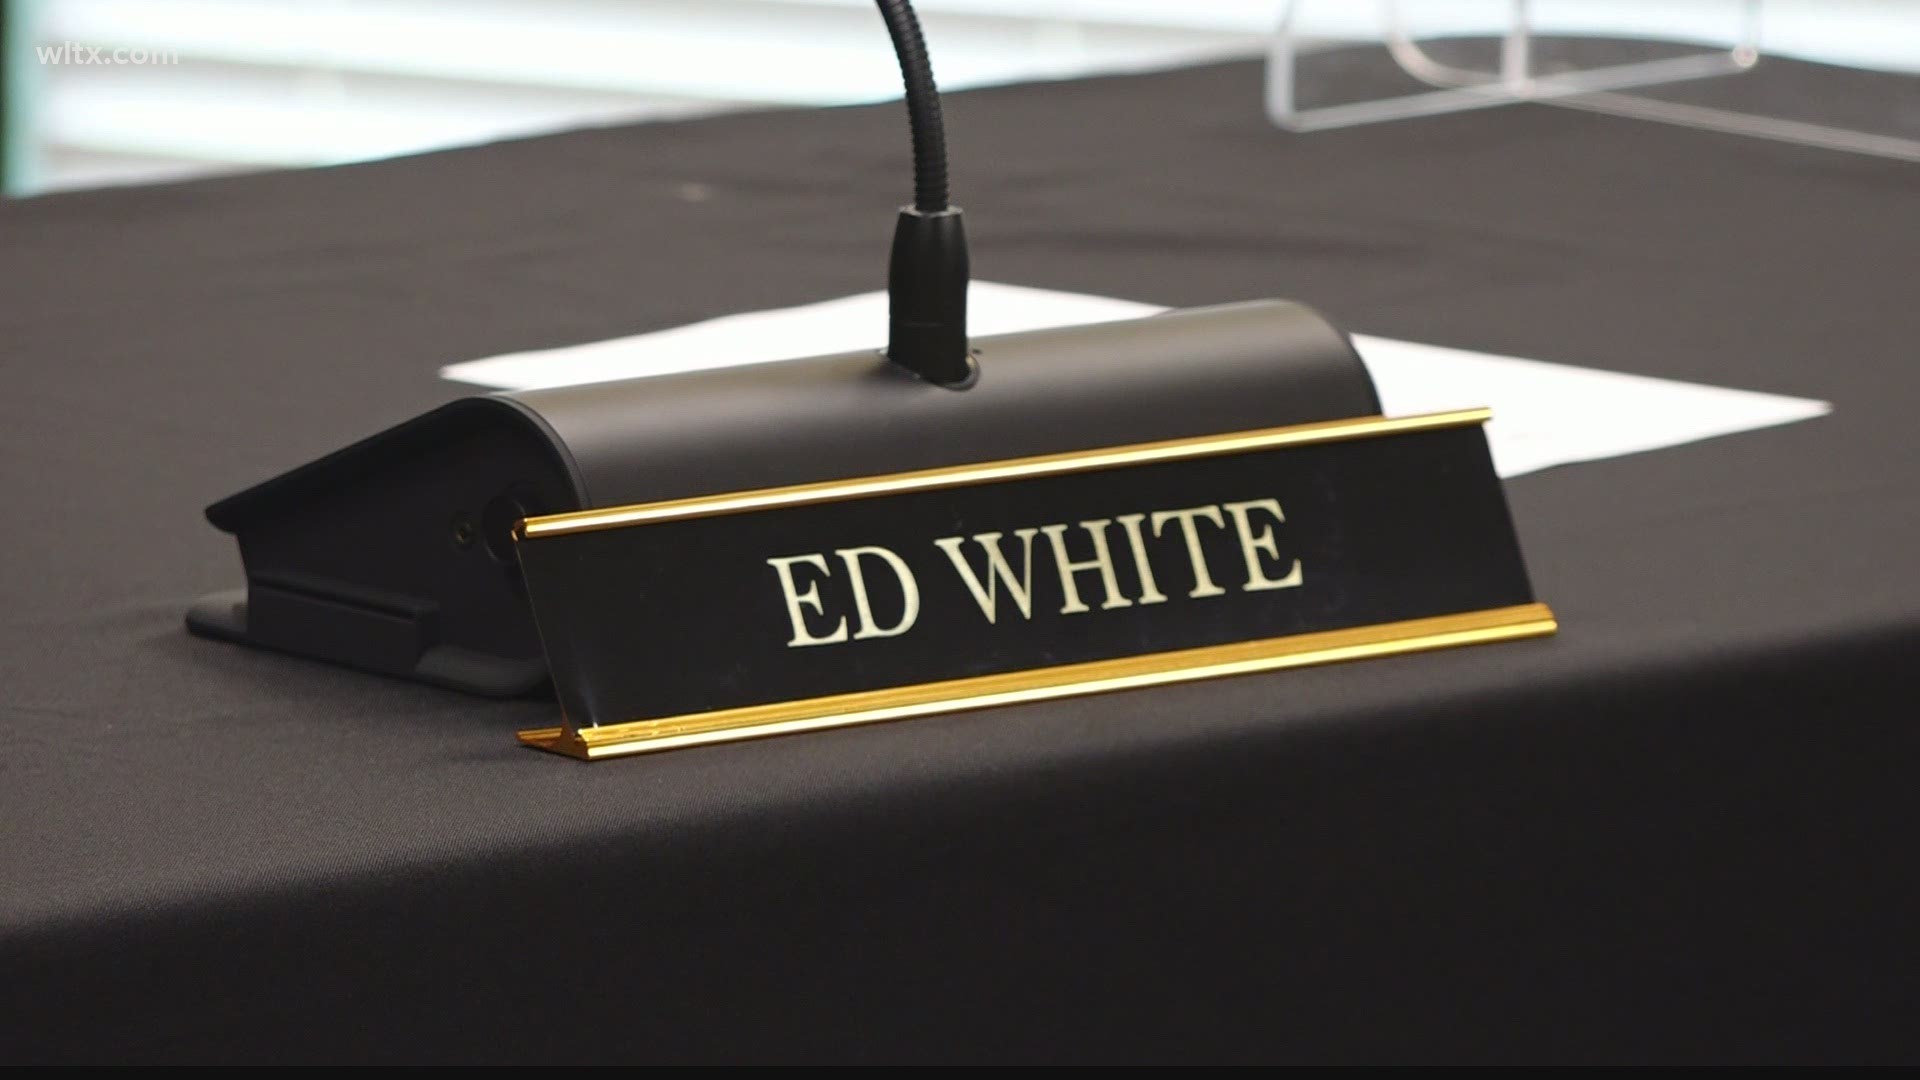 The Lexington-Richland School District Five Board of Trustees voted Monday night to censure soon-to-be ex-board member Ed White.